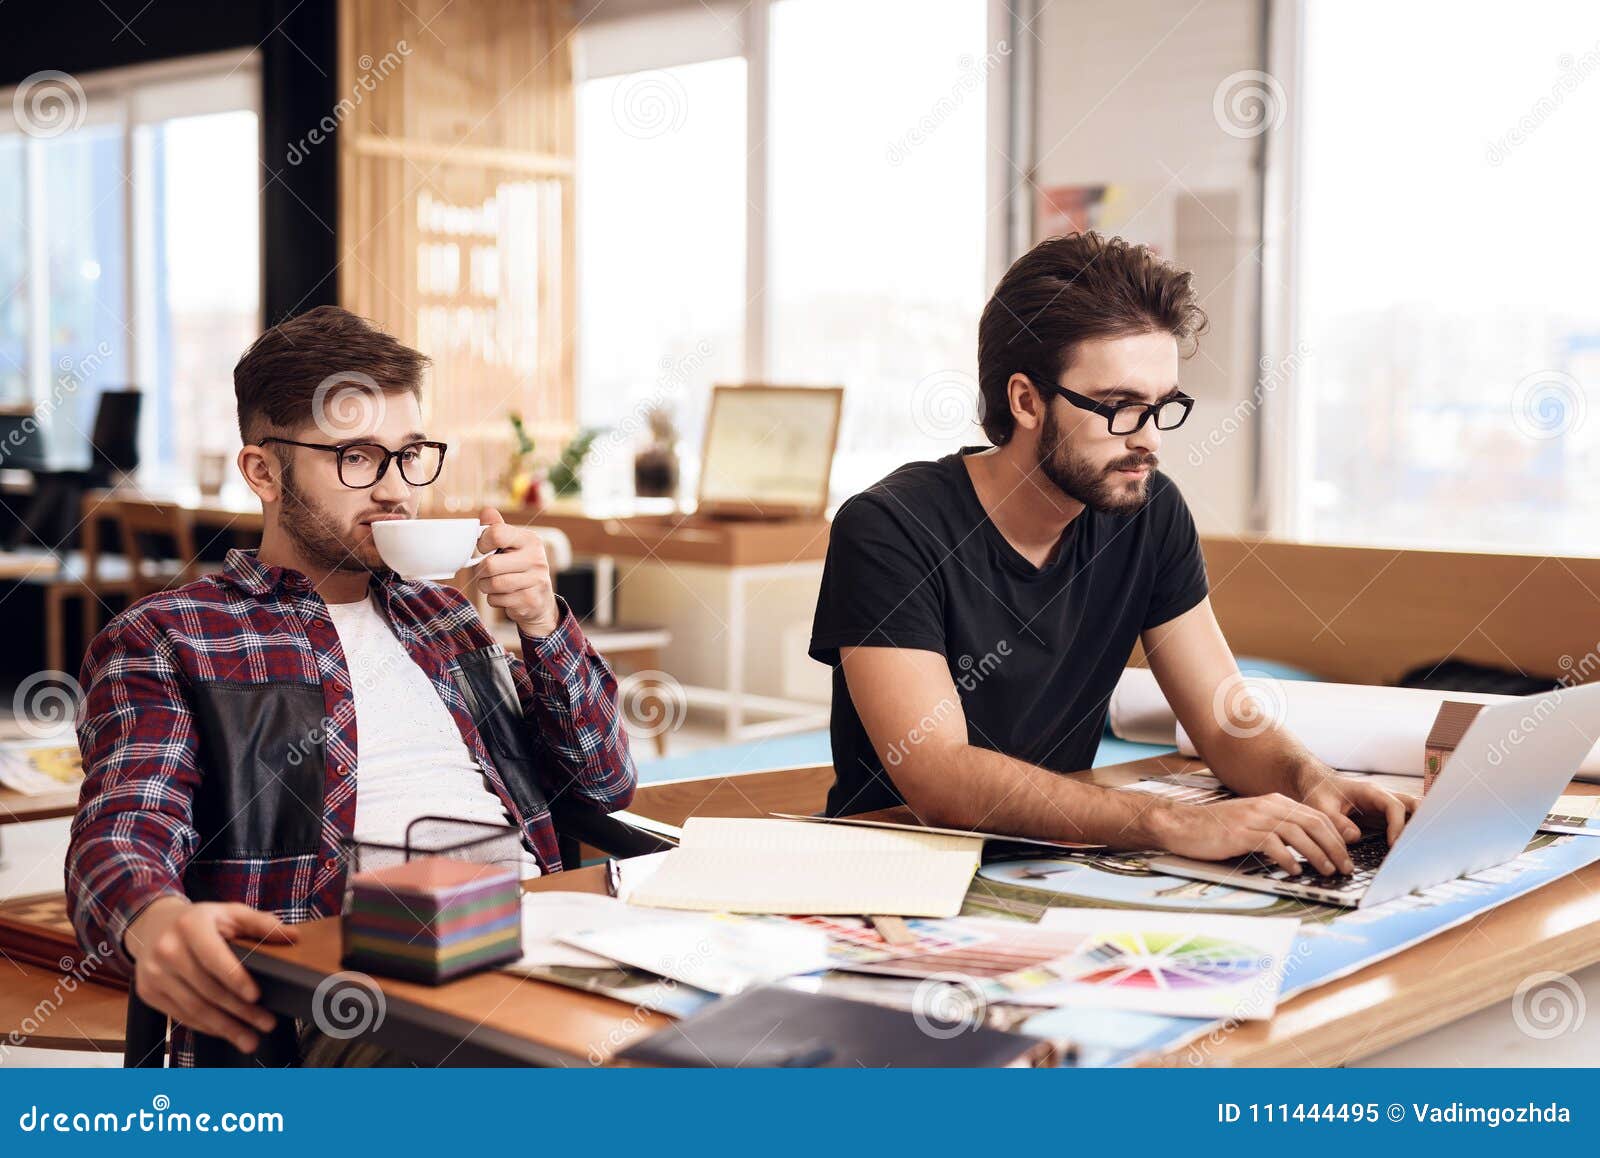 two freelancer men working at laptop and drinking coffee at desk.